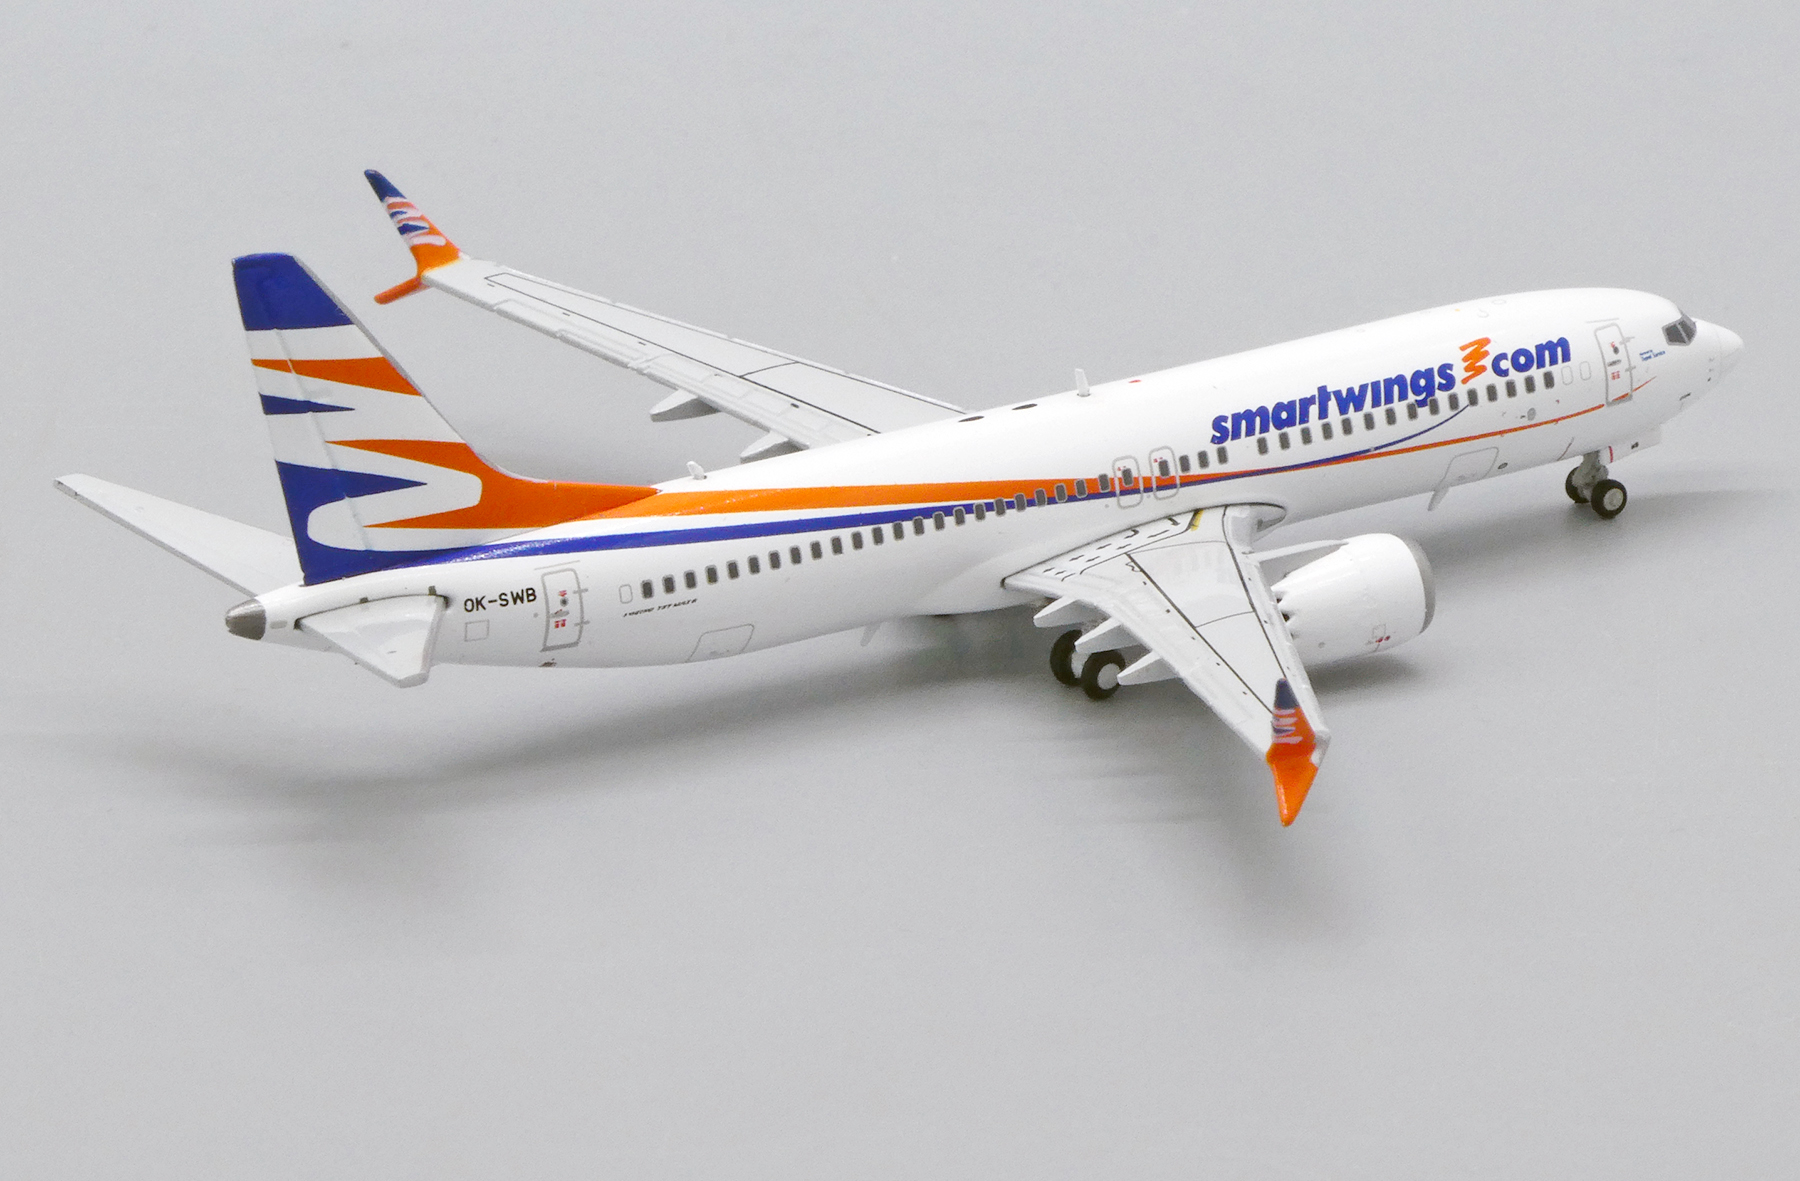 OK-SWB WITH ANTENNA JC WINGS JCLH4189 1/400 SMARTWINGS BOEING 737-8 MAX REG 